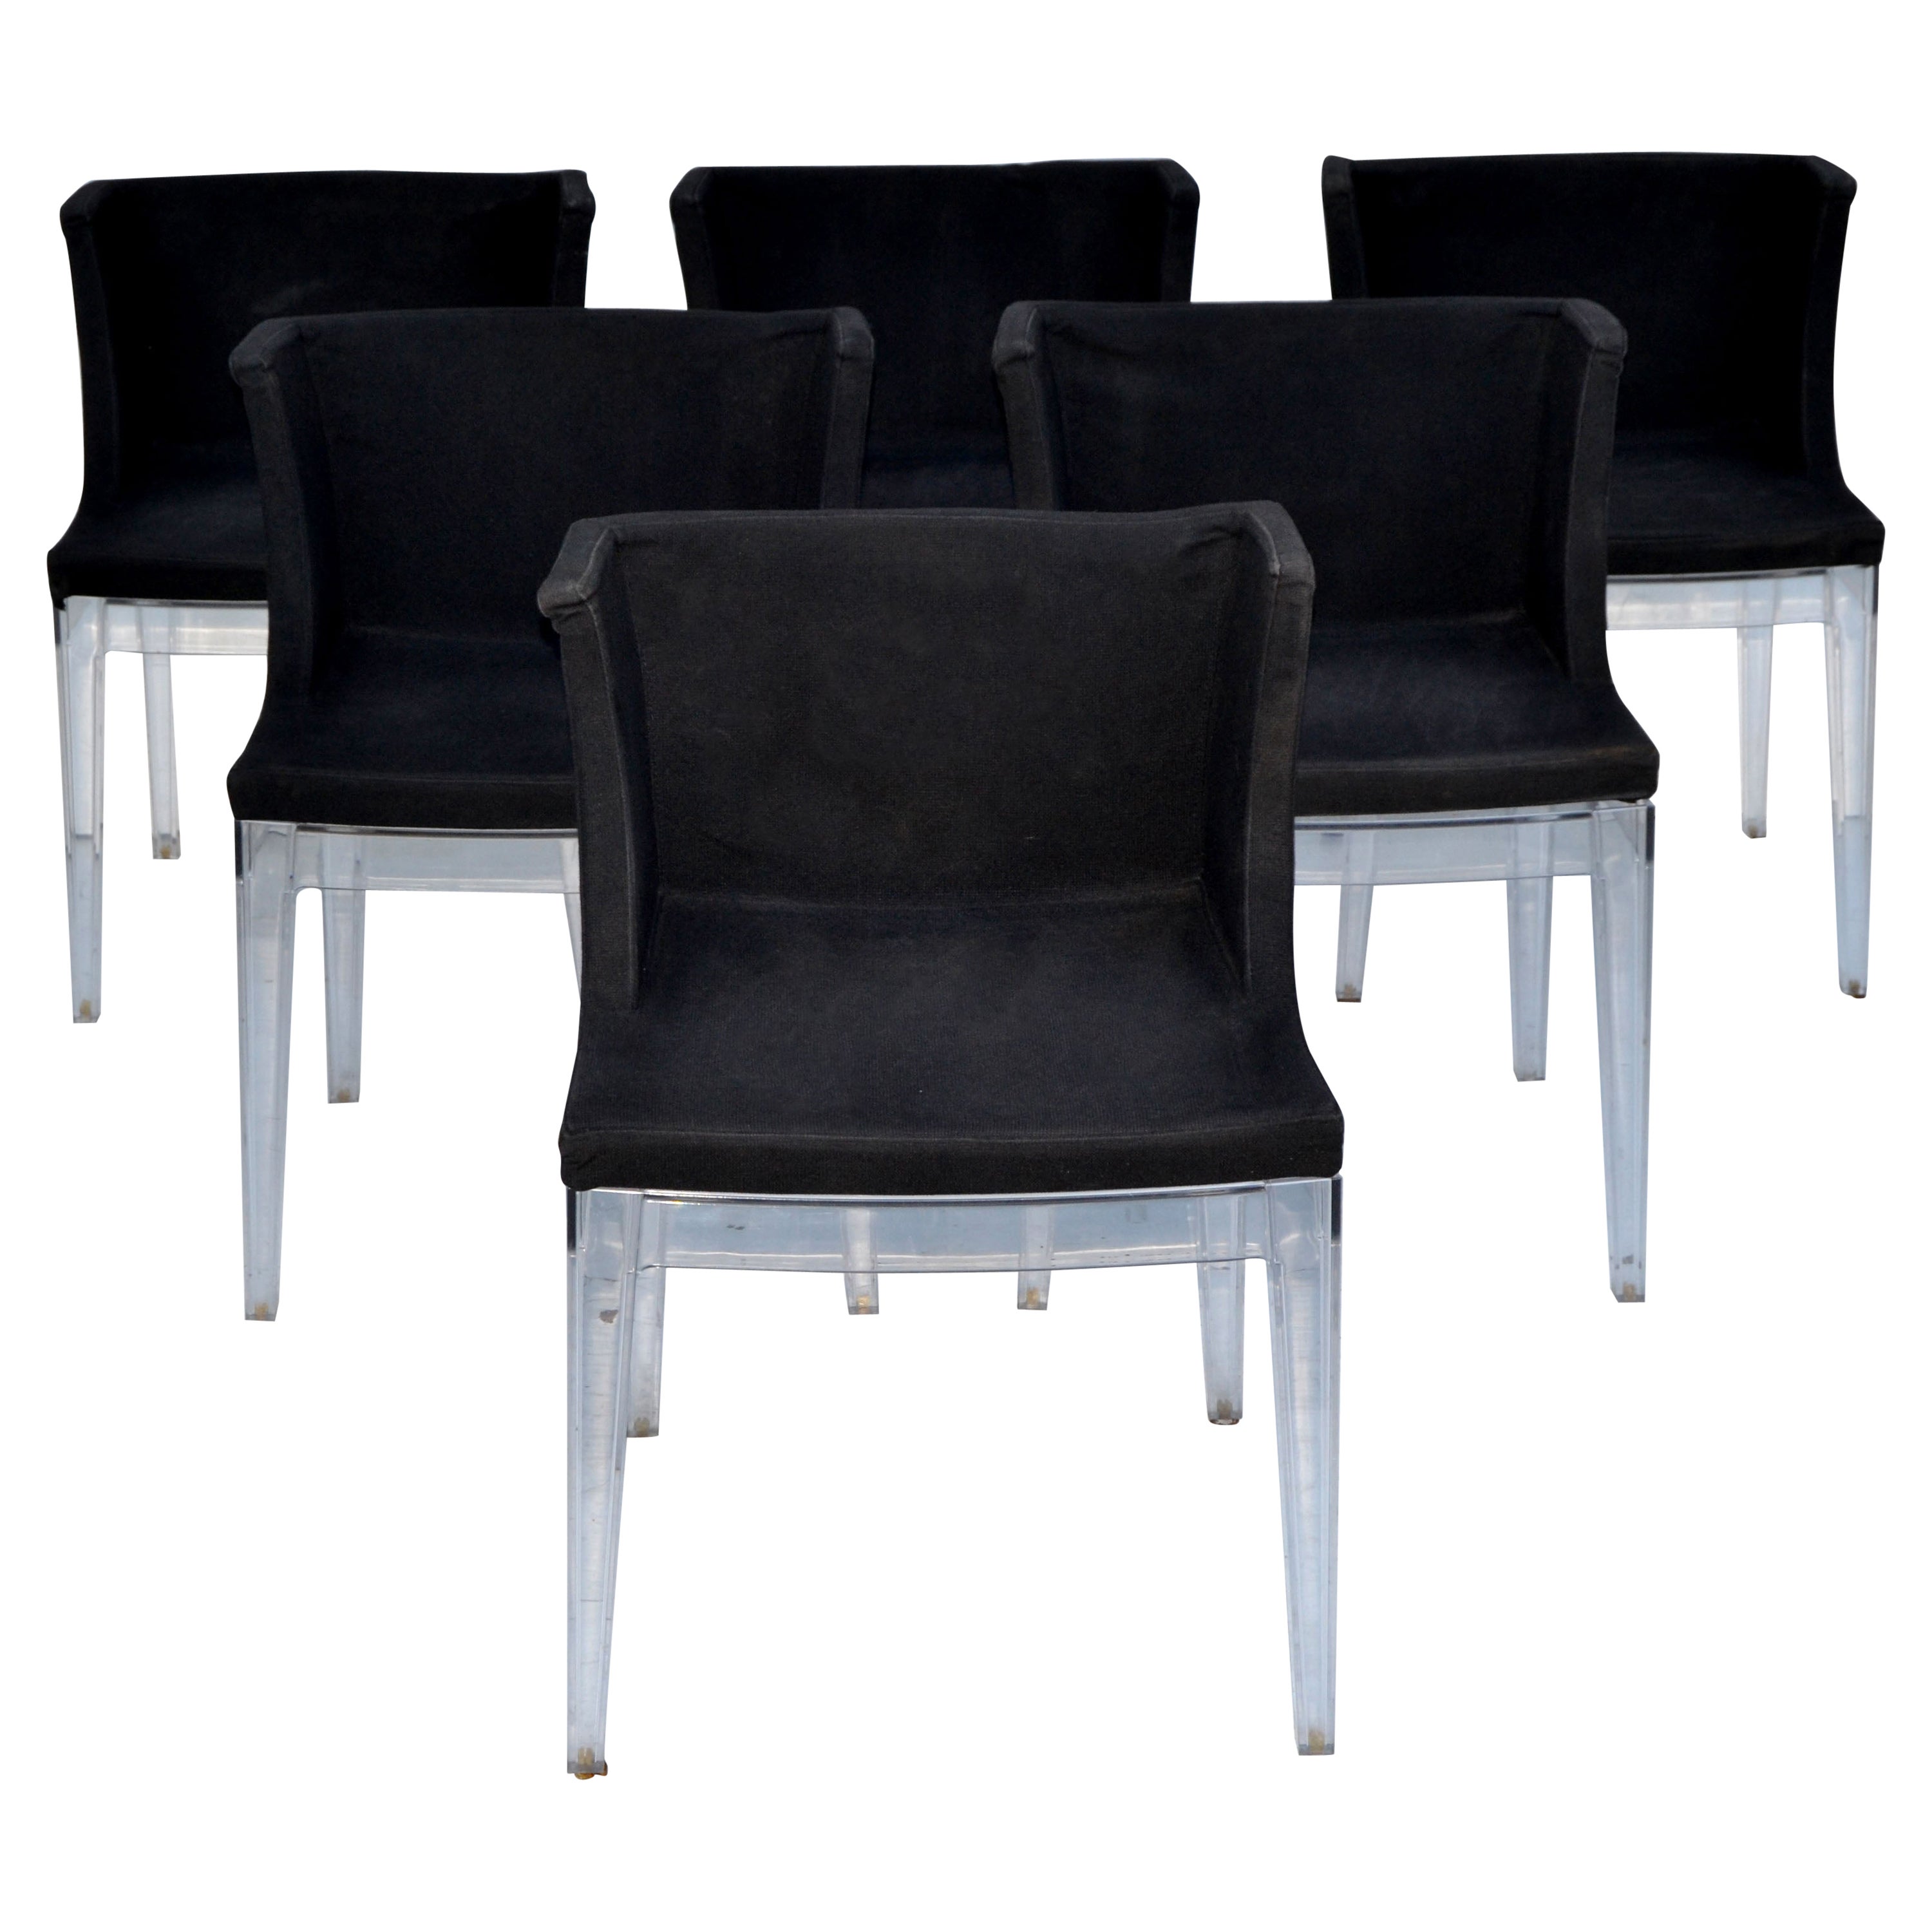 6 Kartell Italy Mademoiselle Chairs by Philippe Starck Black Fabric Lucite For Sale